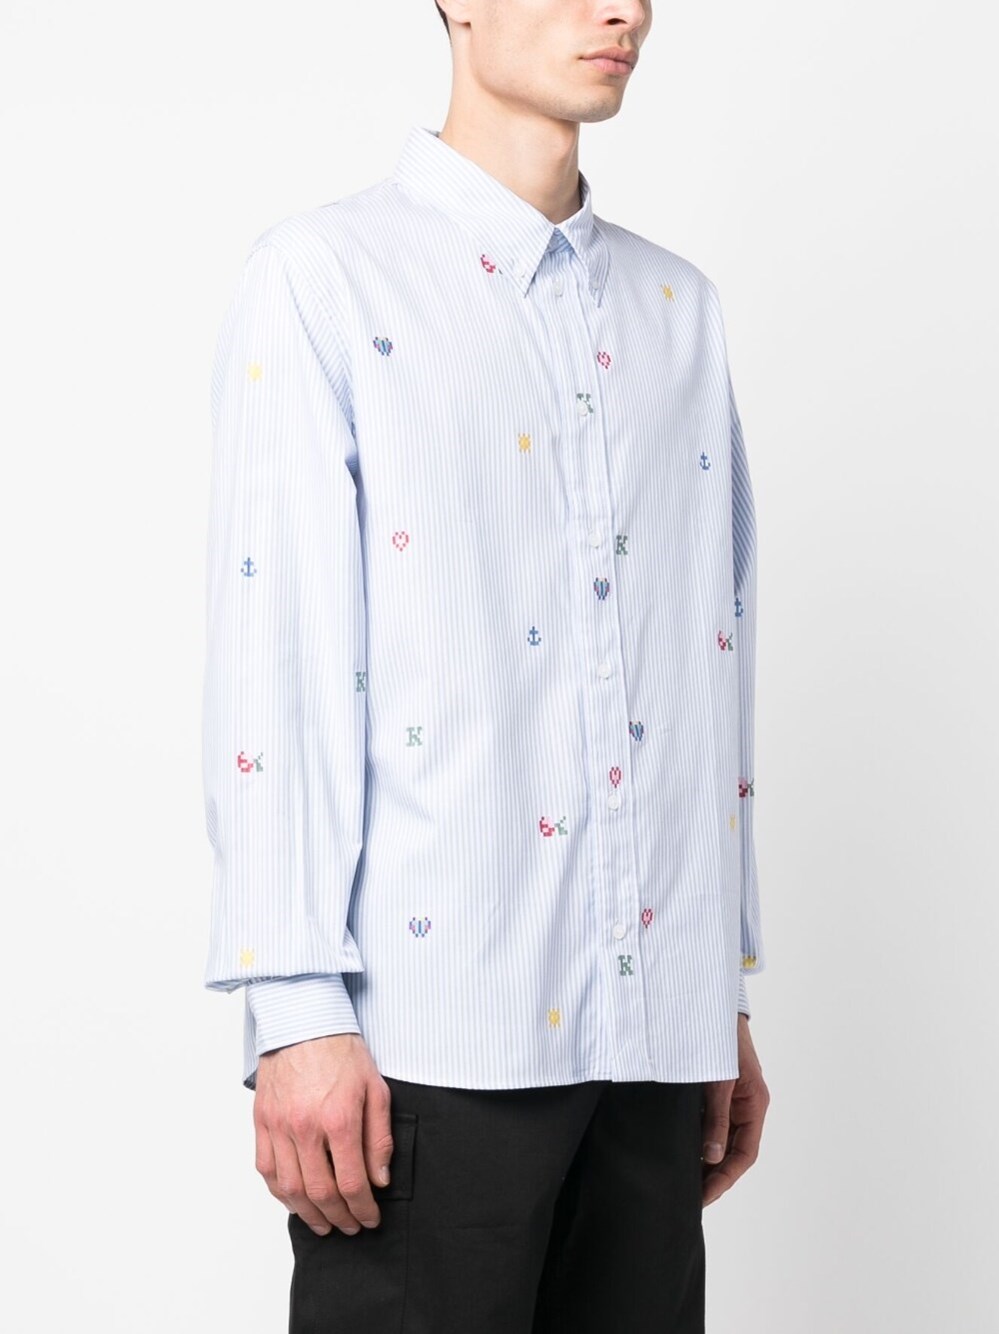 kenzo PIXEL SHIRT available on montiboutique.com - 53787